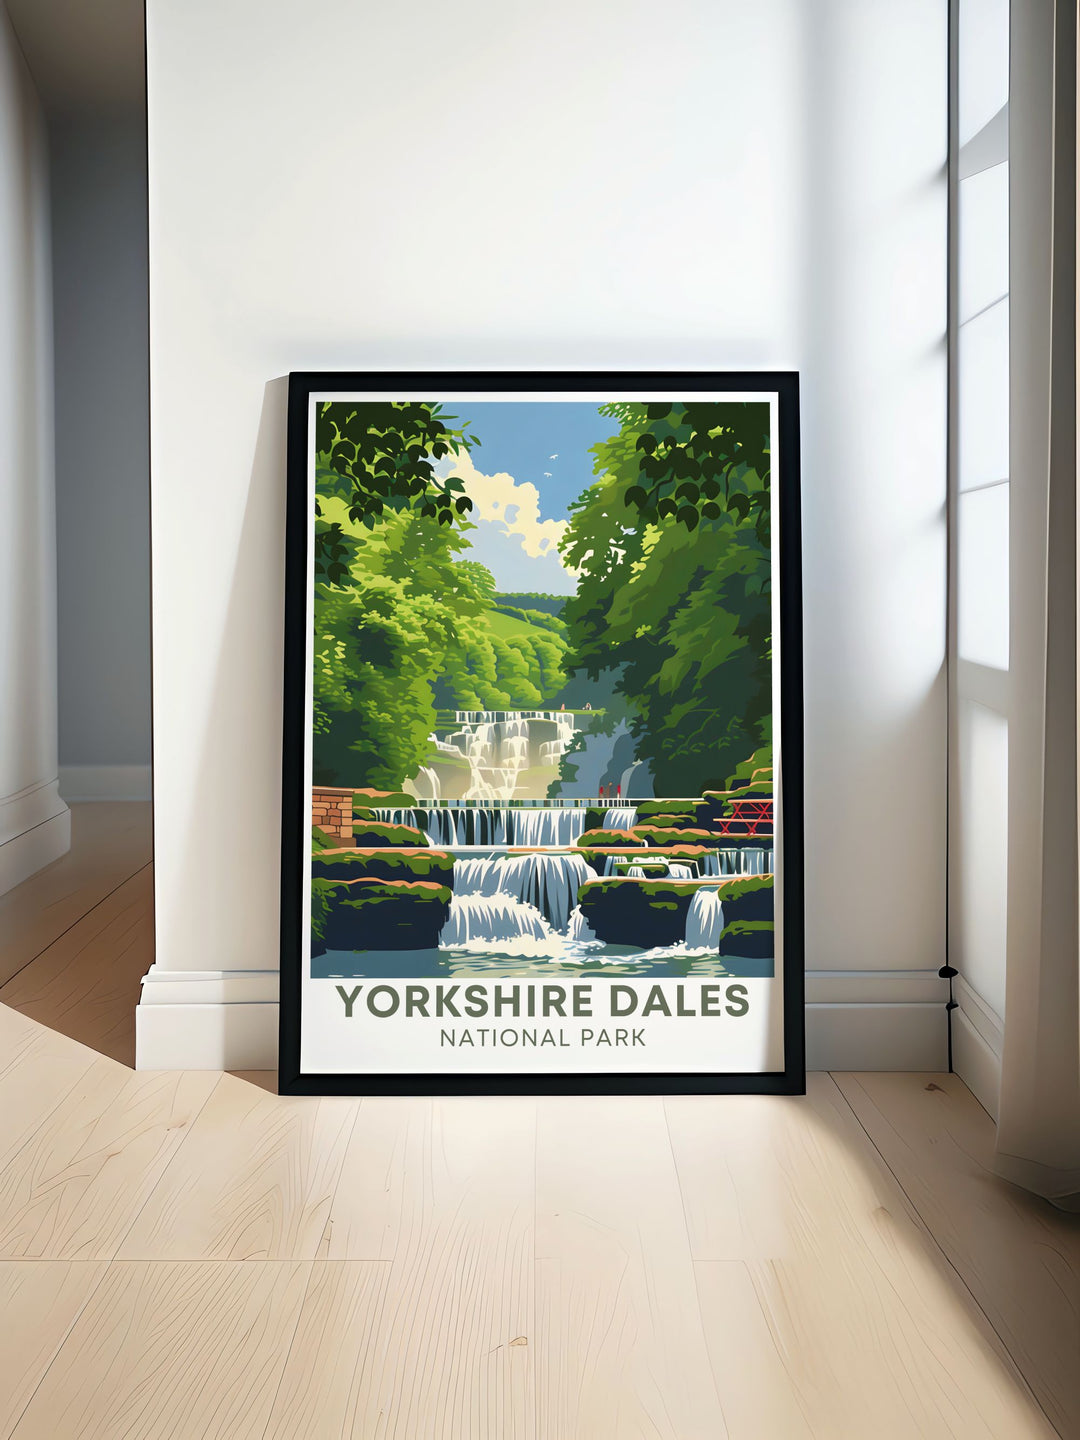 Aysgarth Falls wall art captures the serene beauty of the Yorkshire Dales National Park. This Aysgarth Falls vintage print showcases the cascading waters and lush surroundings making it a perfect addition to any home decor and a beautiful reminder of nature's splendor.